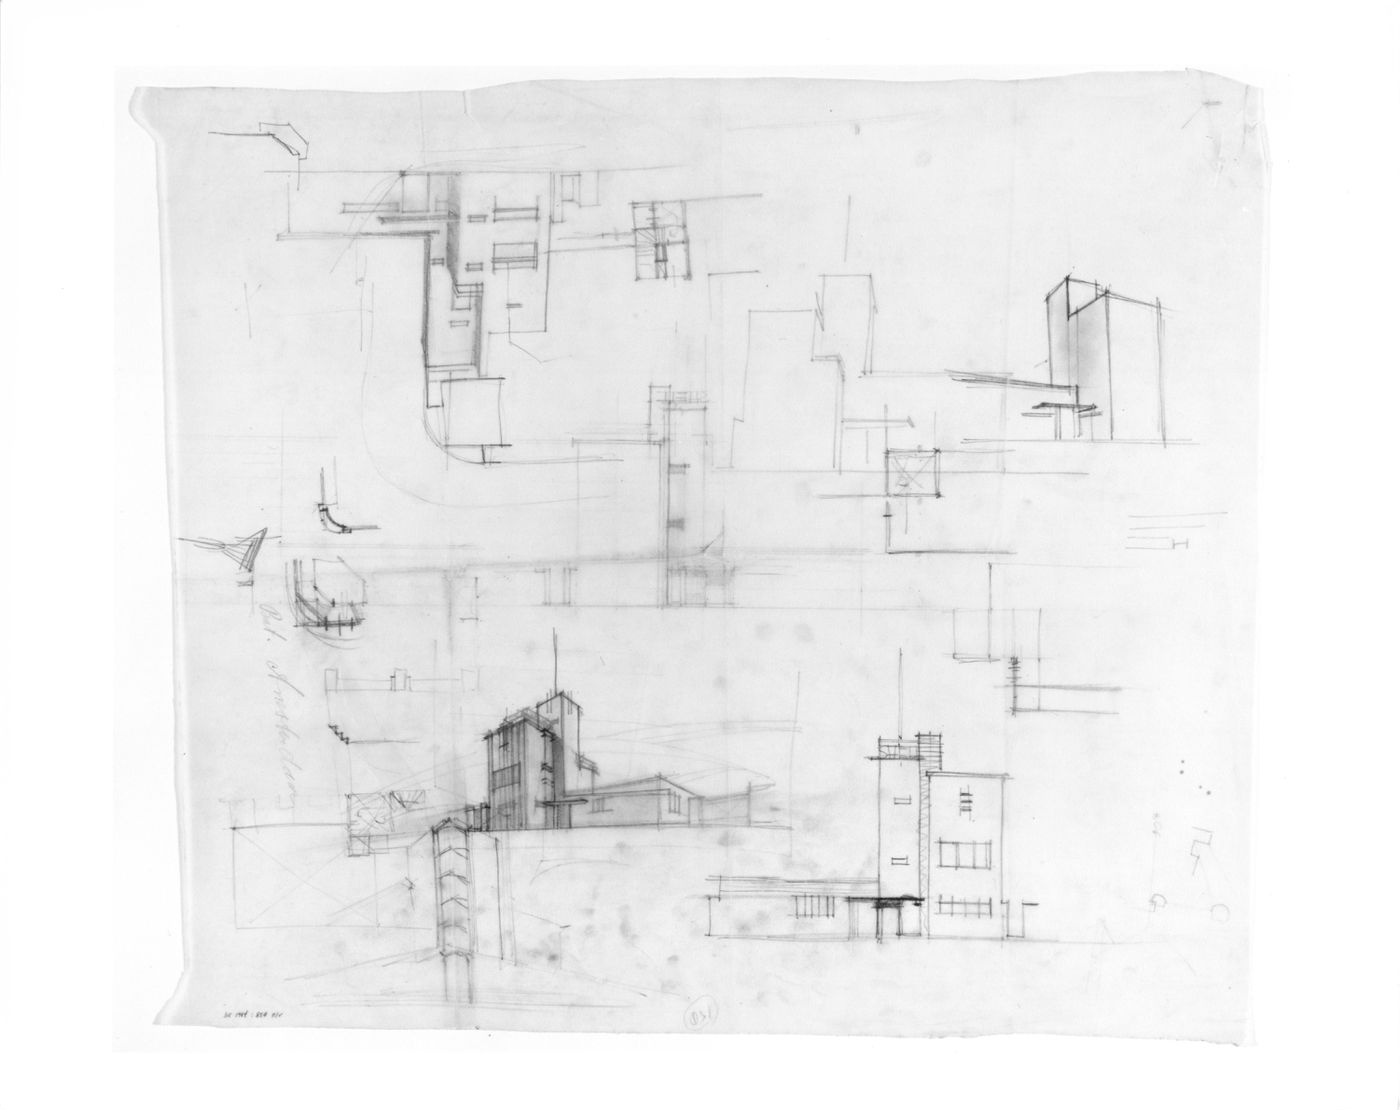 Sketch perspective and sketch elevation for an administration building for the Shell Company, Amsterdam, Netherlands